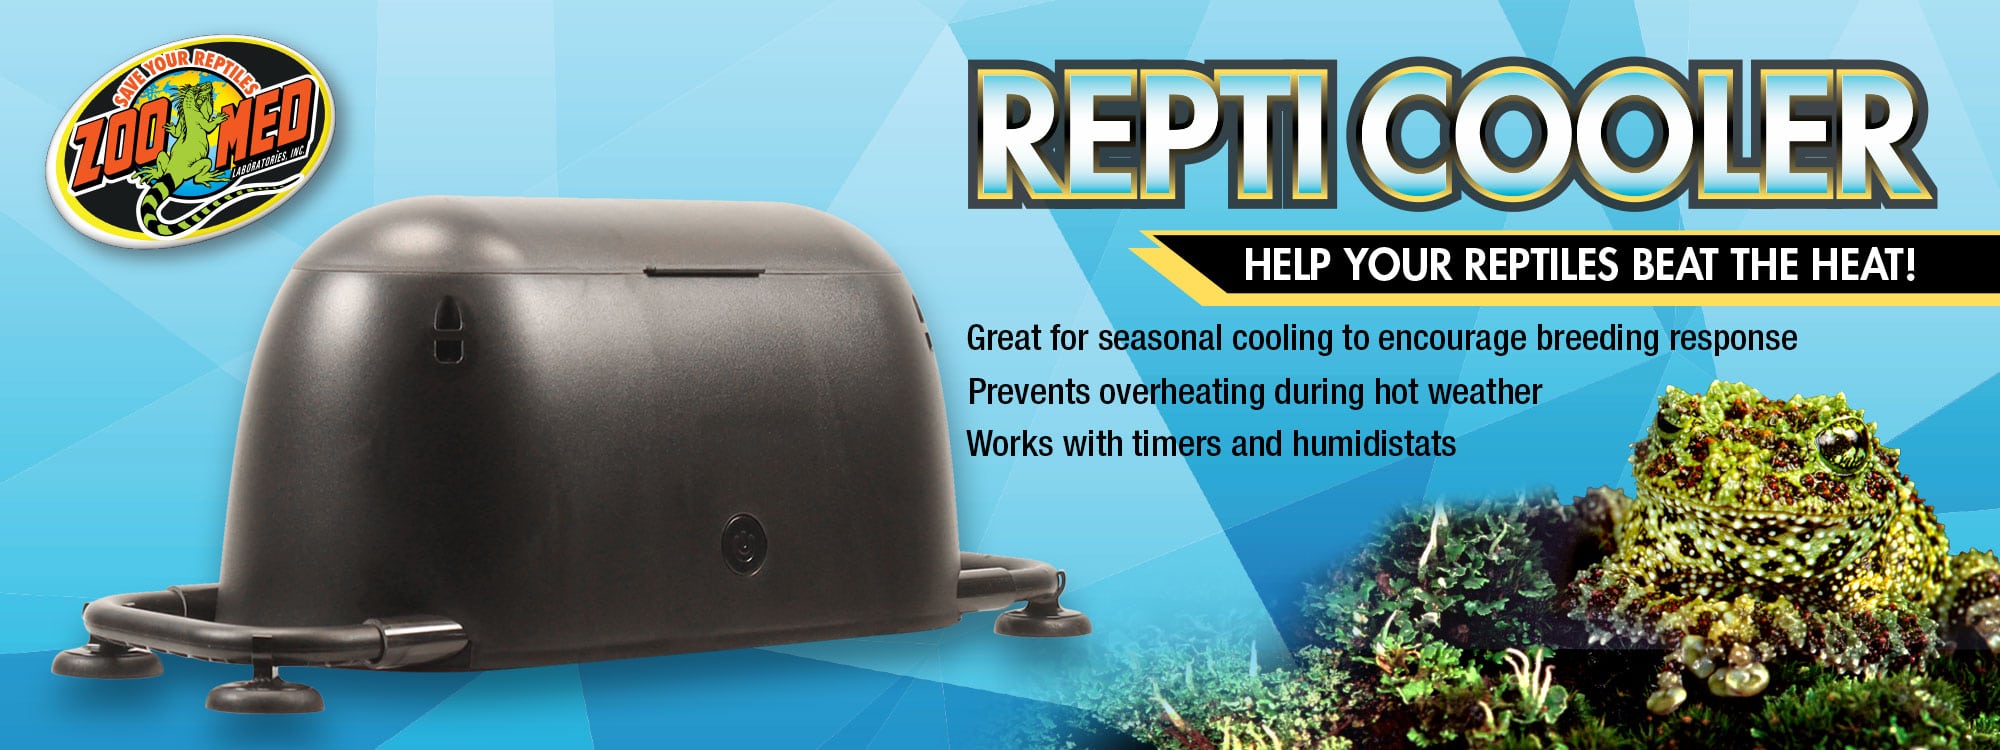 Repti Cooler. Lowers ambient temperature through evaporative cooling by up to 10°F, just add water.